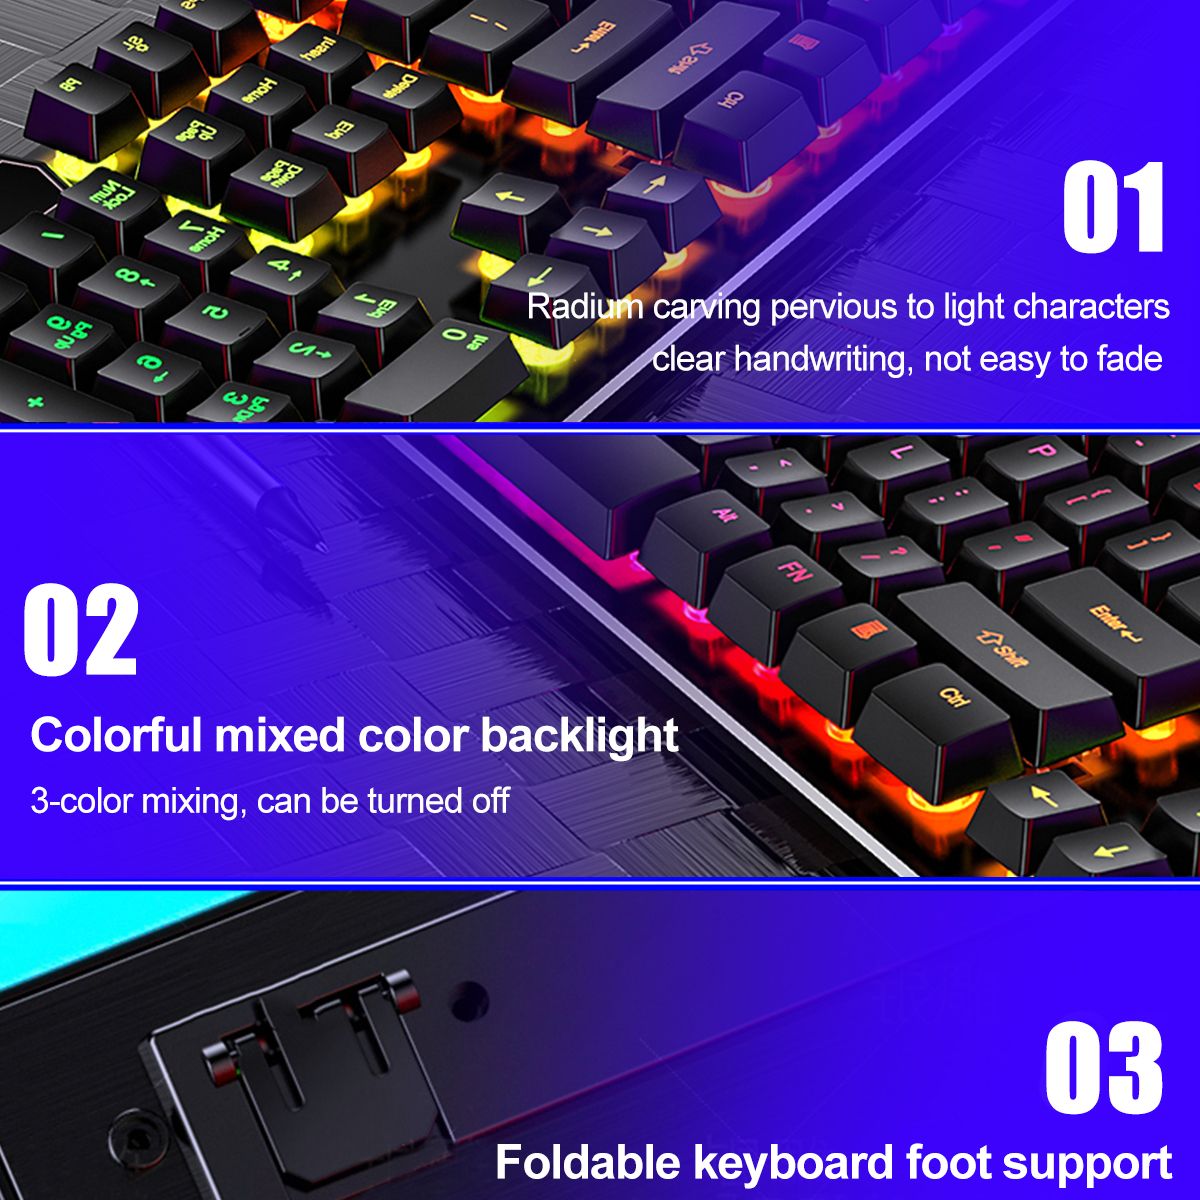 104-Keys-USB-Wired-Gaming-Keyboard-and-Mouse-Set-Waterproof-SilentSound-Changing-Backlight-Mouse-for-1742044